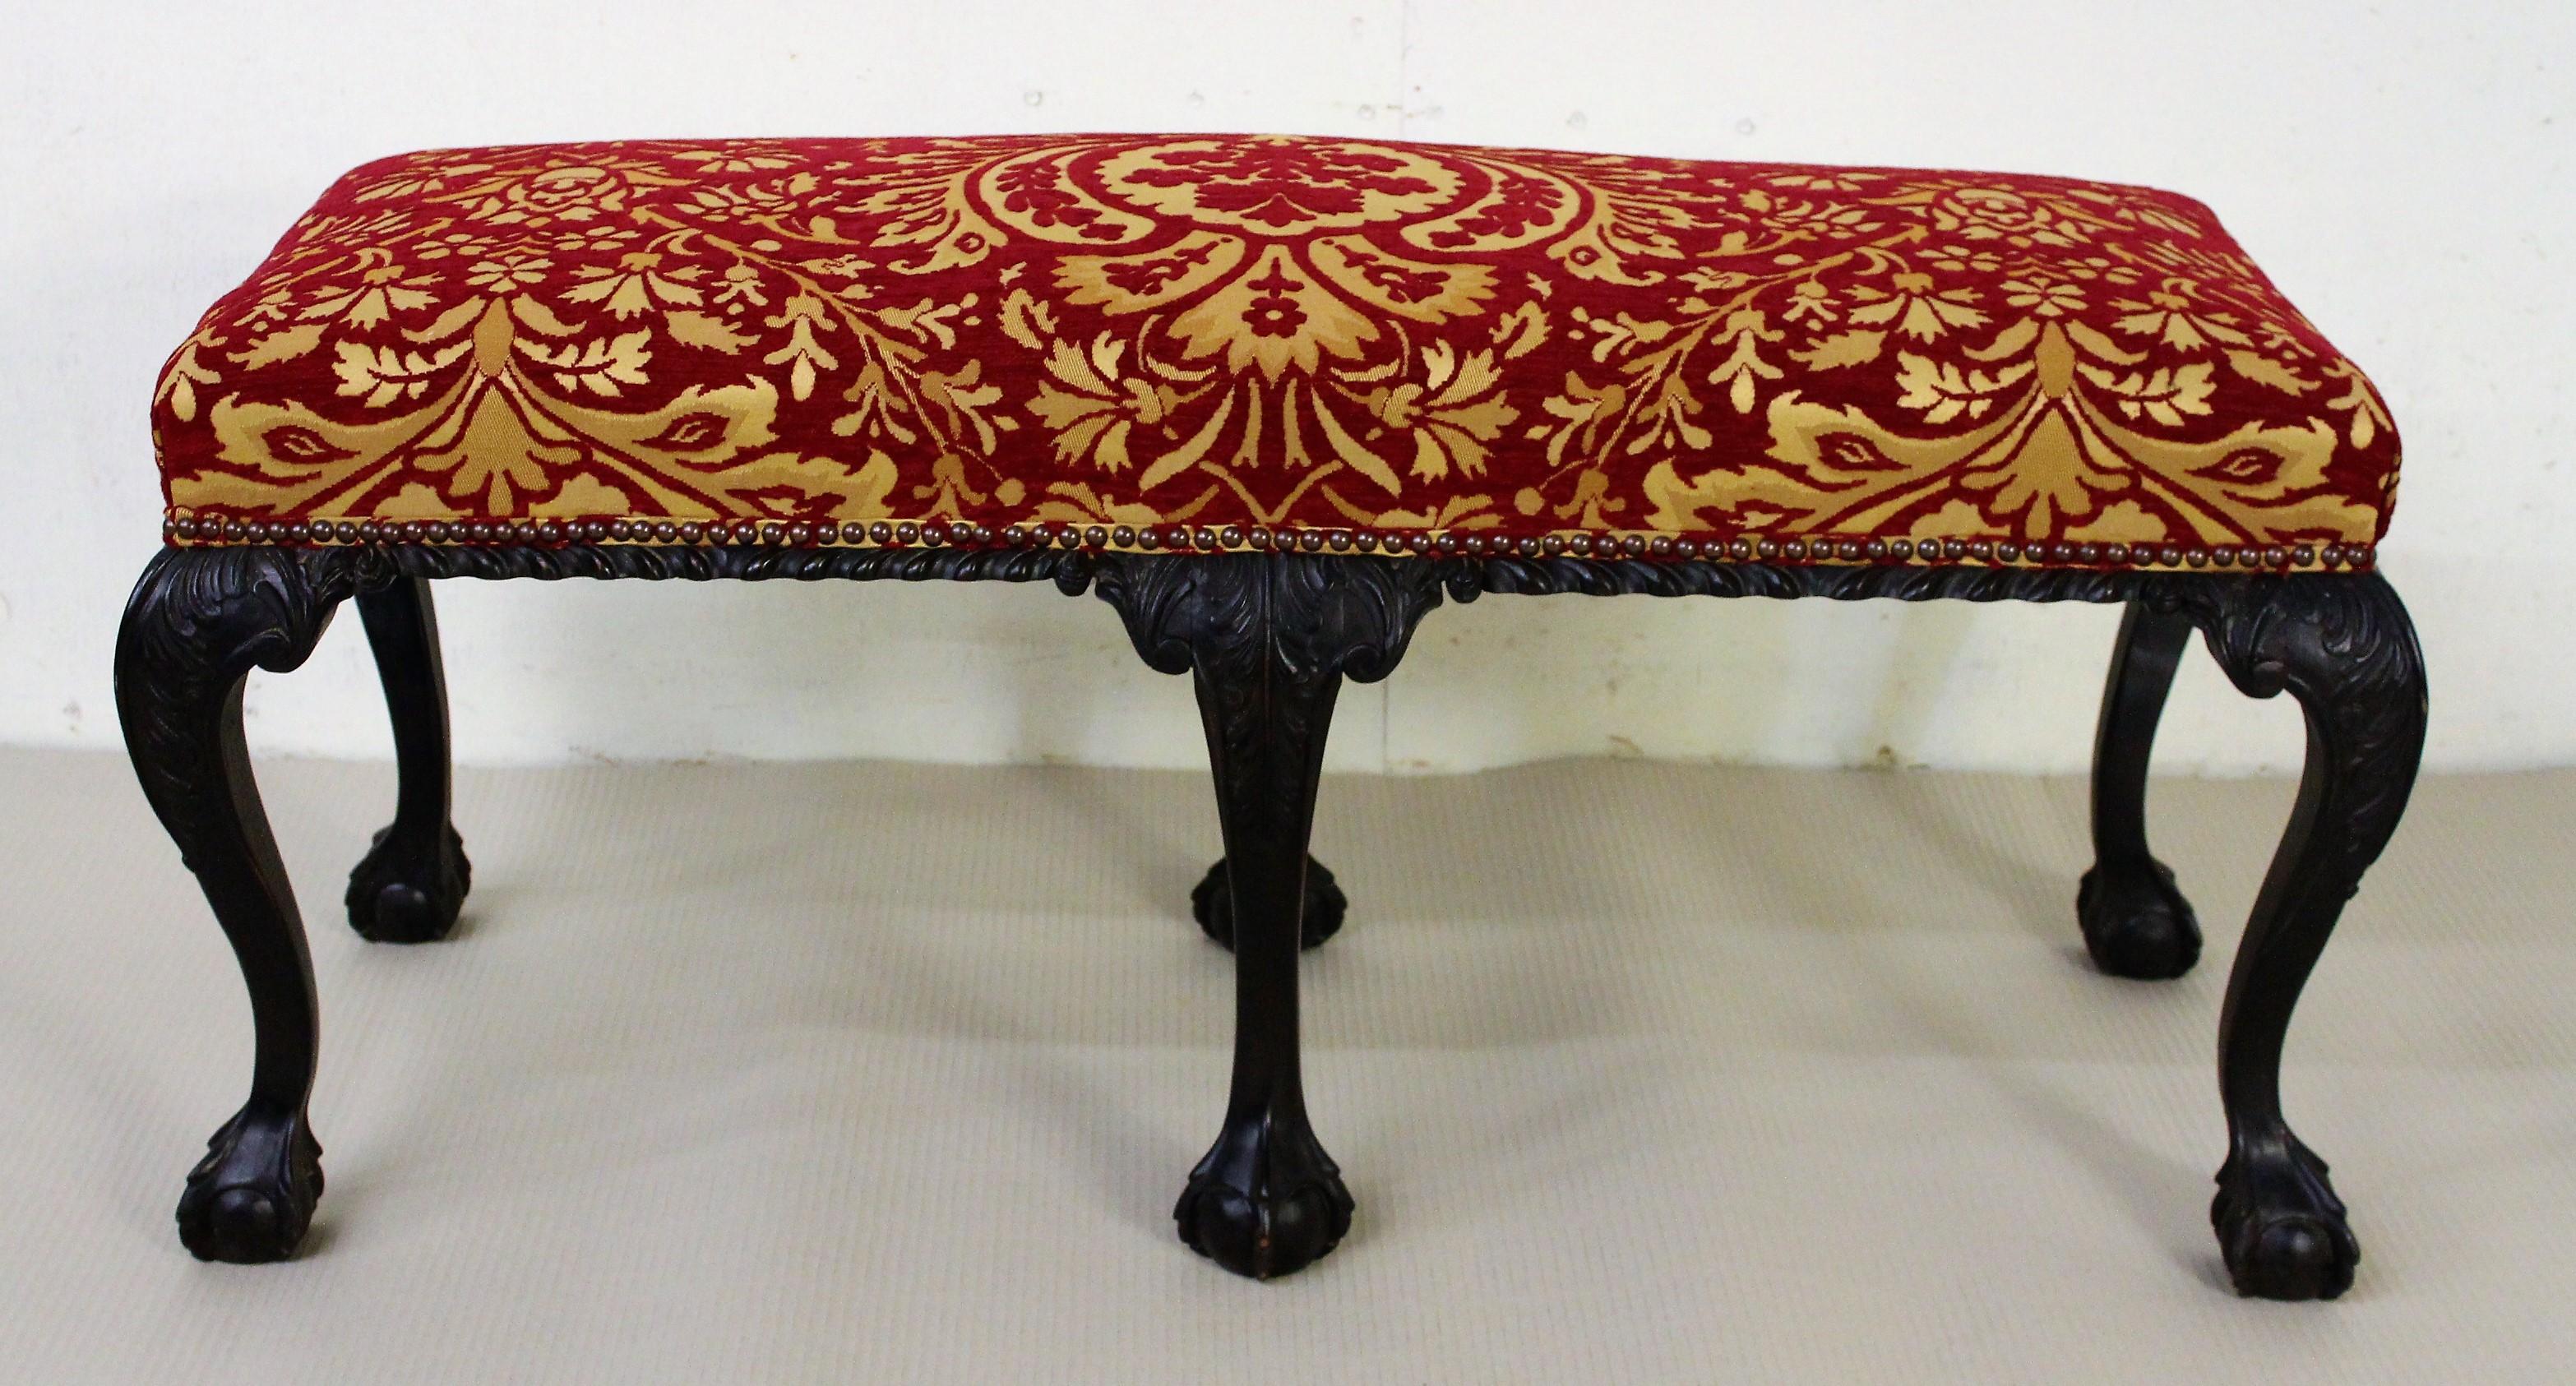 A bold and impressive late 19th century mahogany upholstered stool in the manner of Thomas Chippendale. Well-constructed in solid mahogany with crisply carved decorations. With 6 legs, each terminating in characteristic ball and claw feet. Would sit